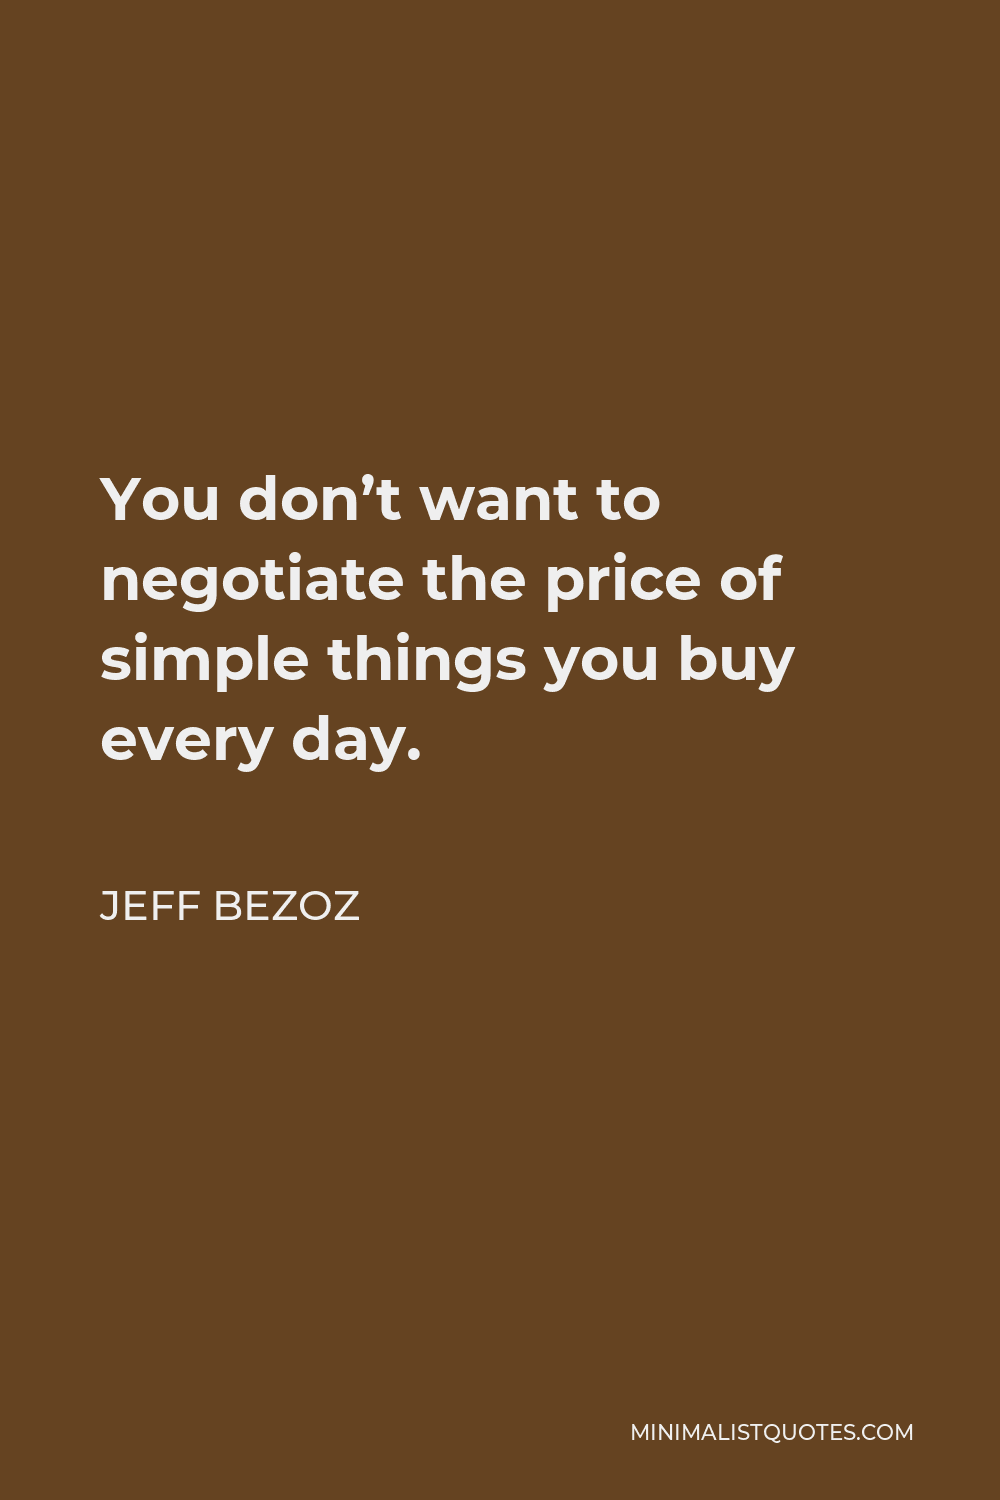 Jeff Bezoz Quote - You don’t want to negotiate the price of simple things you buy every day.